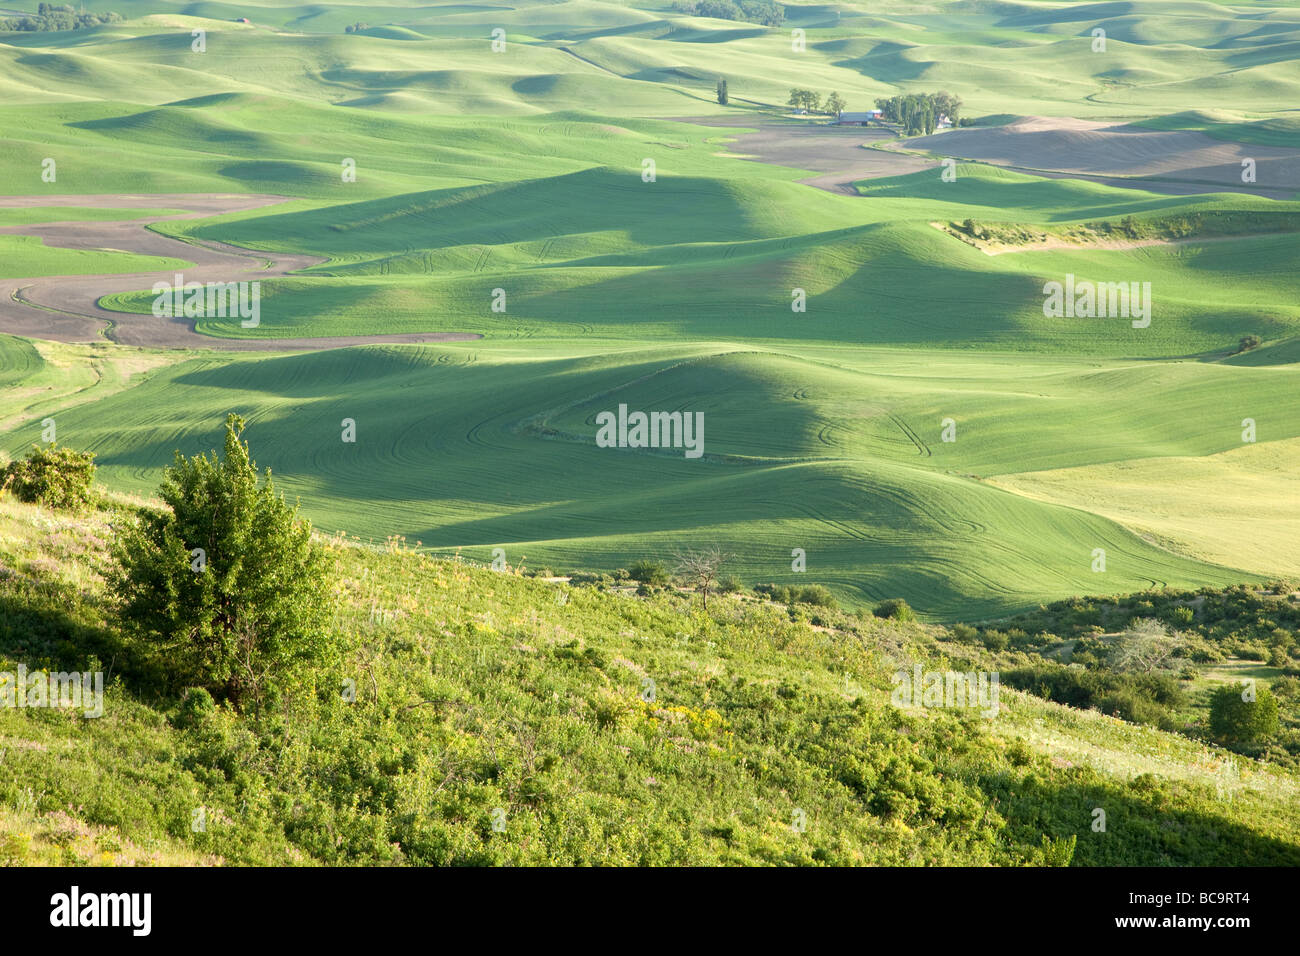 View from Steptoe Butte, Palouse Country, Southeastern Washington State, USA. Farmland in the Distance. Stock Photo